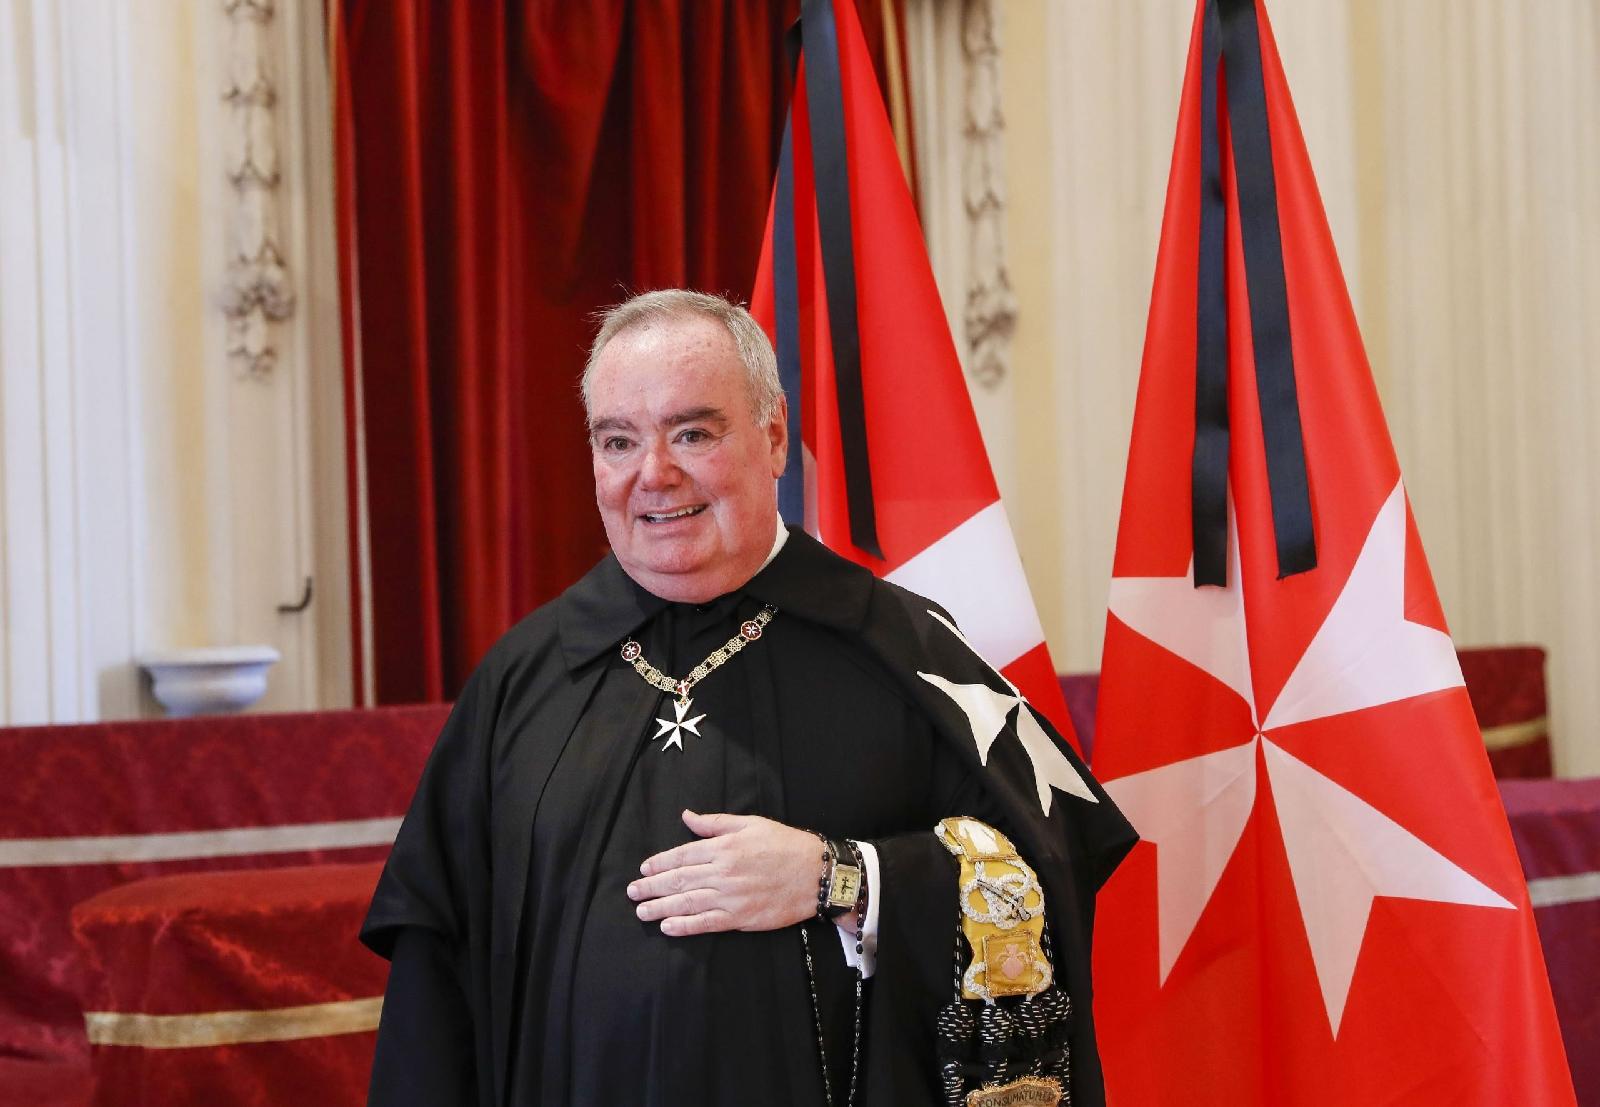 Pope issues new constitution, code for the Order of Malta